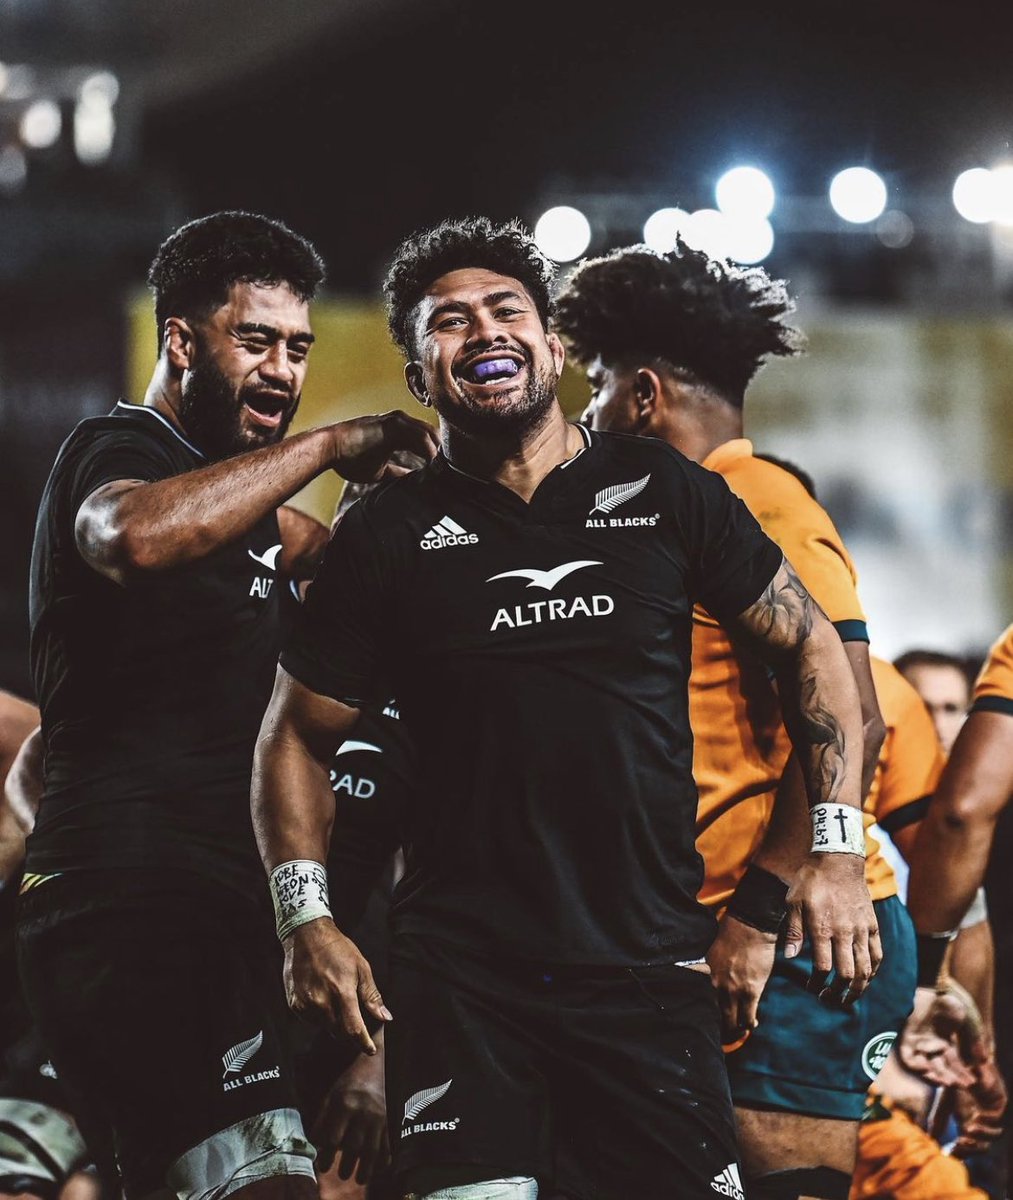 Congratulations to the #AllBlacks on winning the Rugby Championship 🇳🇿 We look forward to seeing them in Cardiff on November 5th. #AutumnNationsSeries